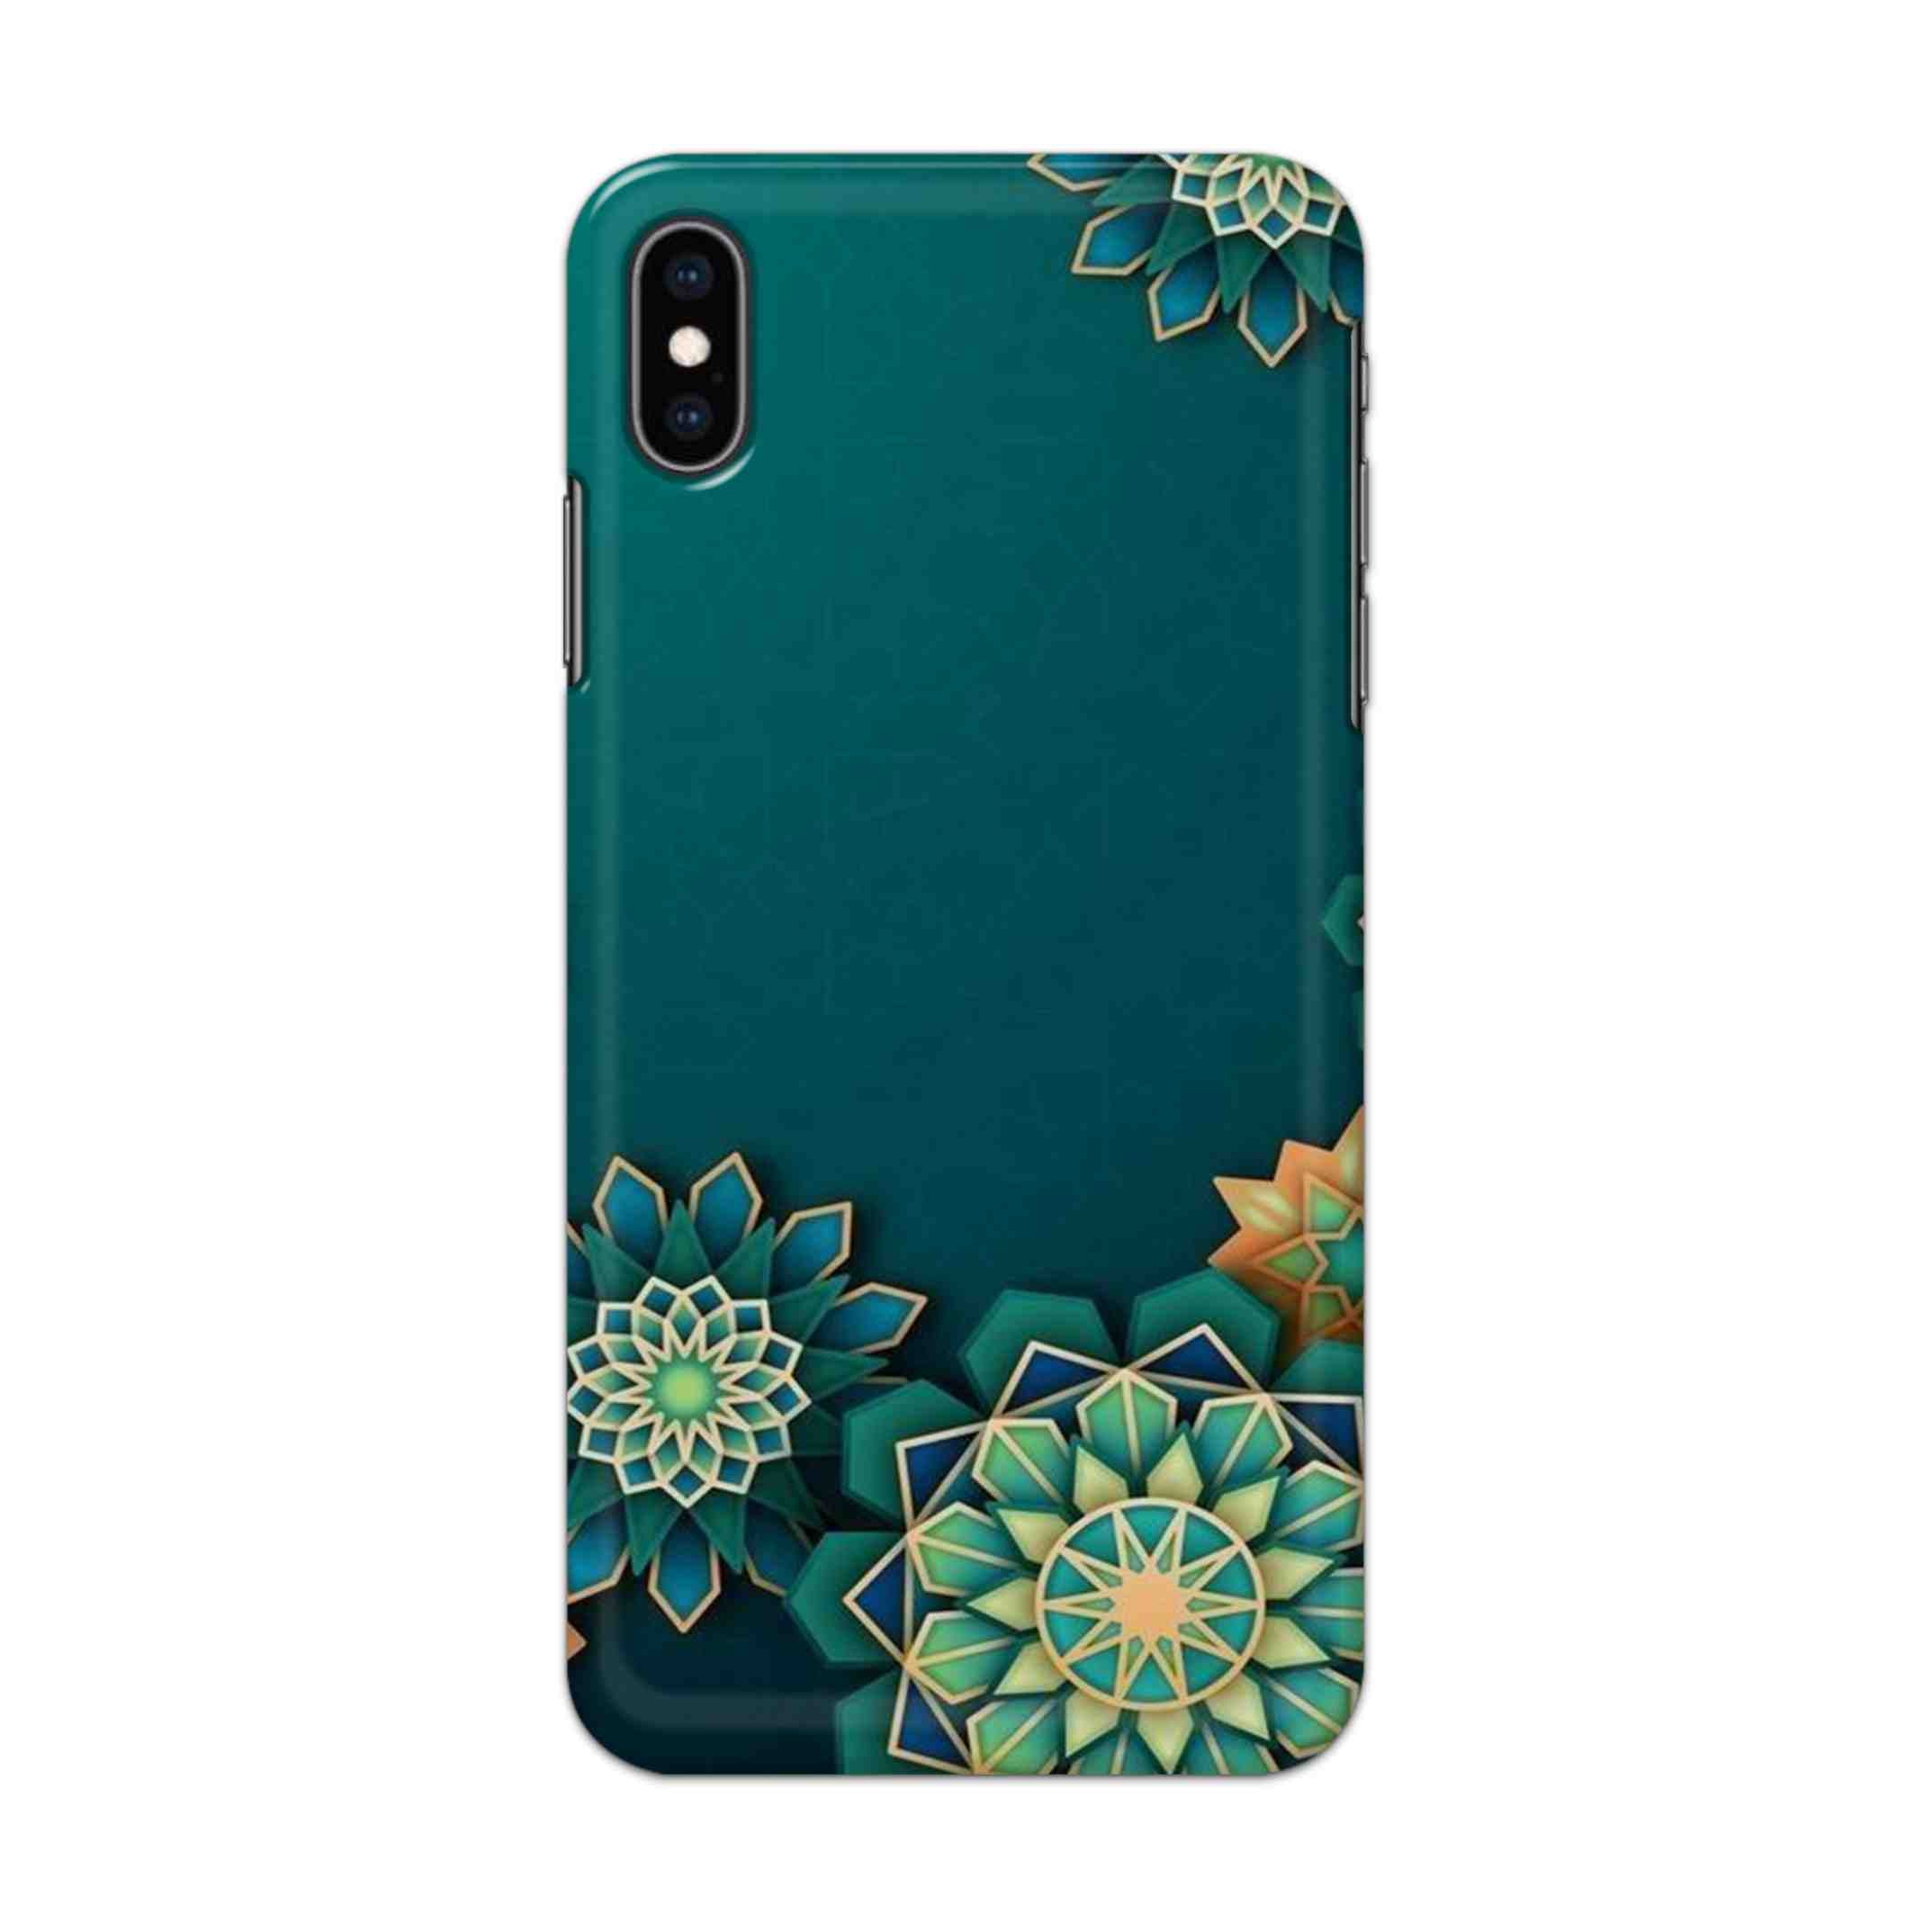 Buy Green Flower Hard Back Mobile Phone Case/Cover For iPhone XS MAX Online